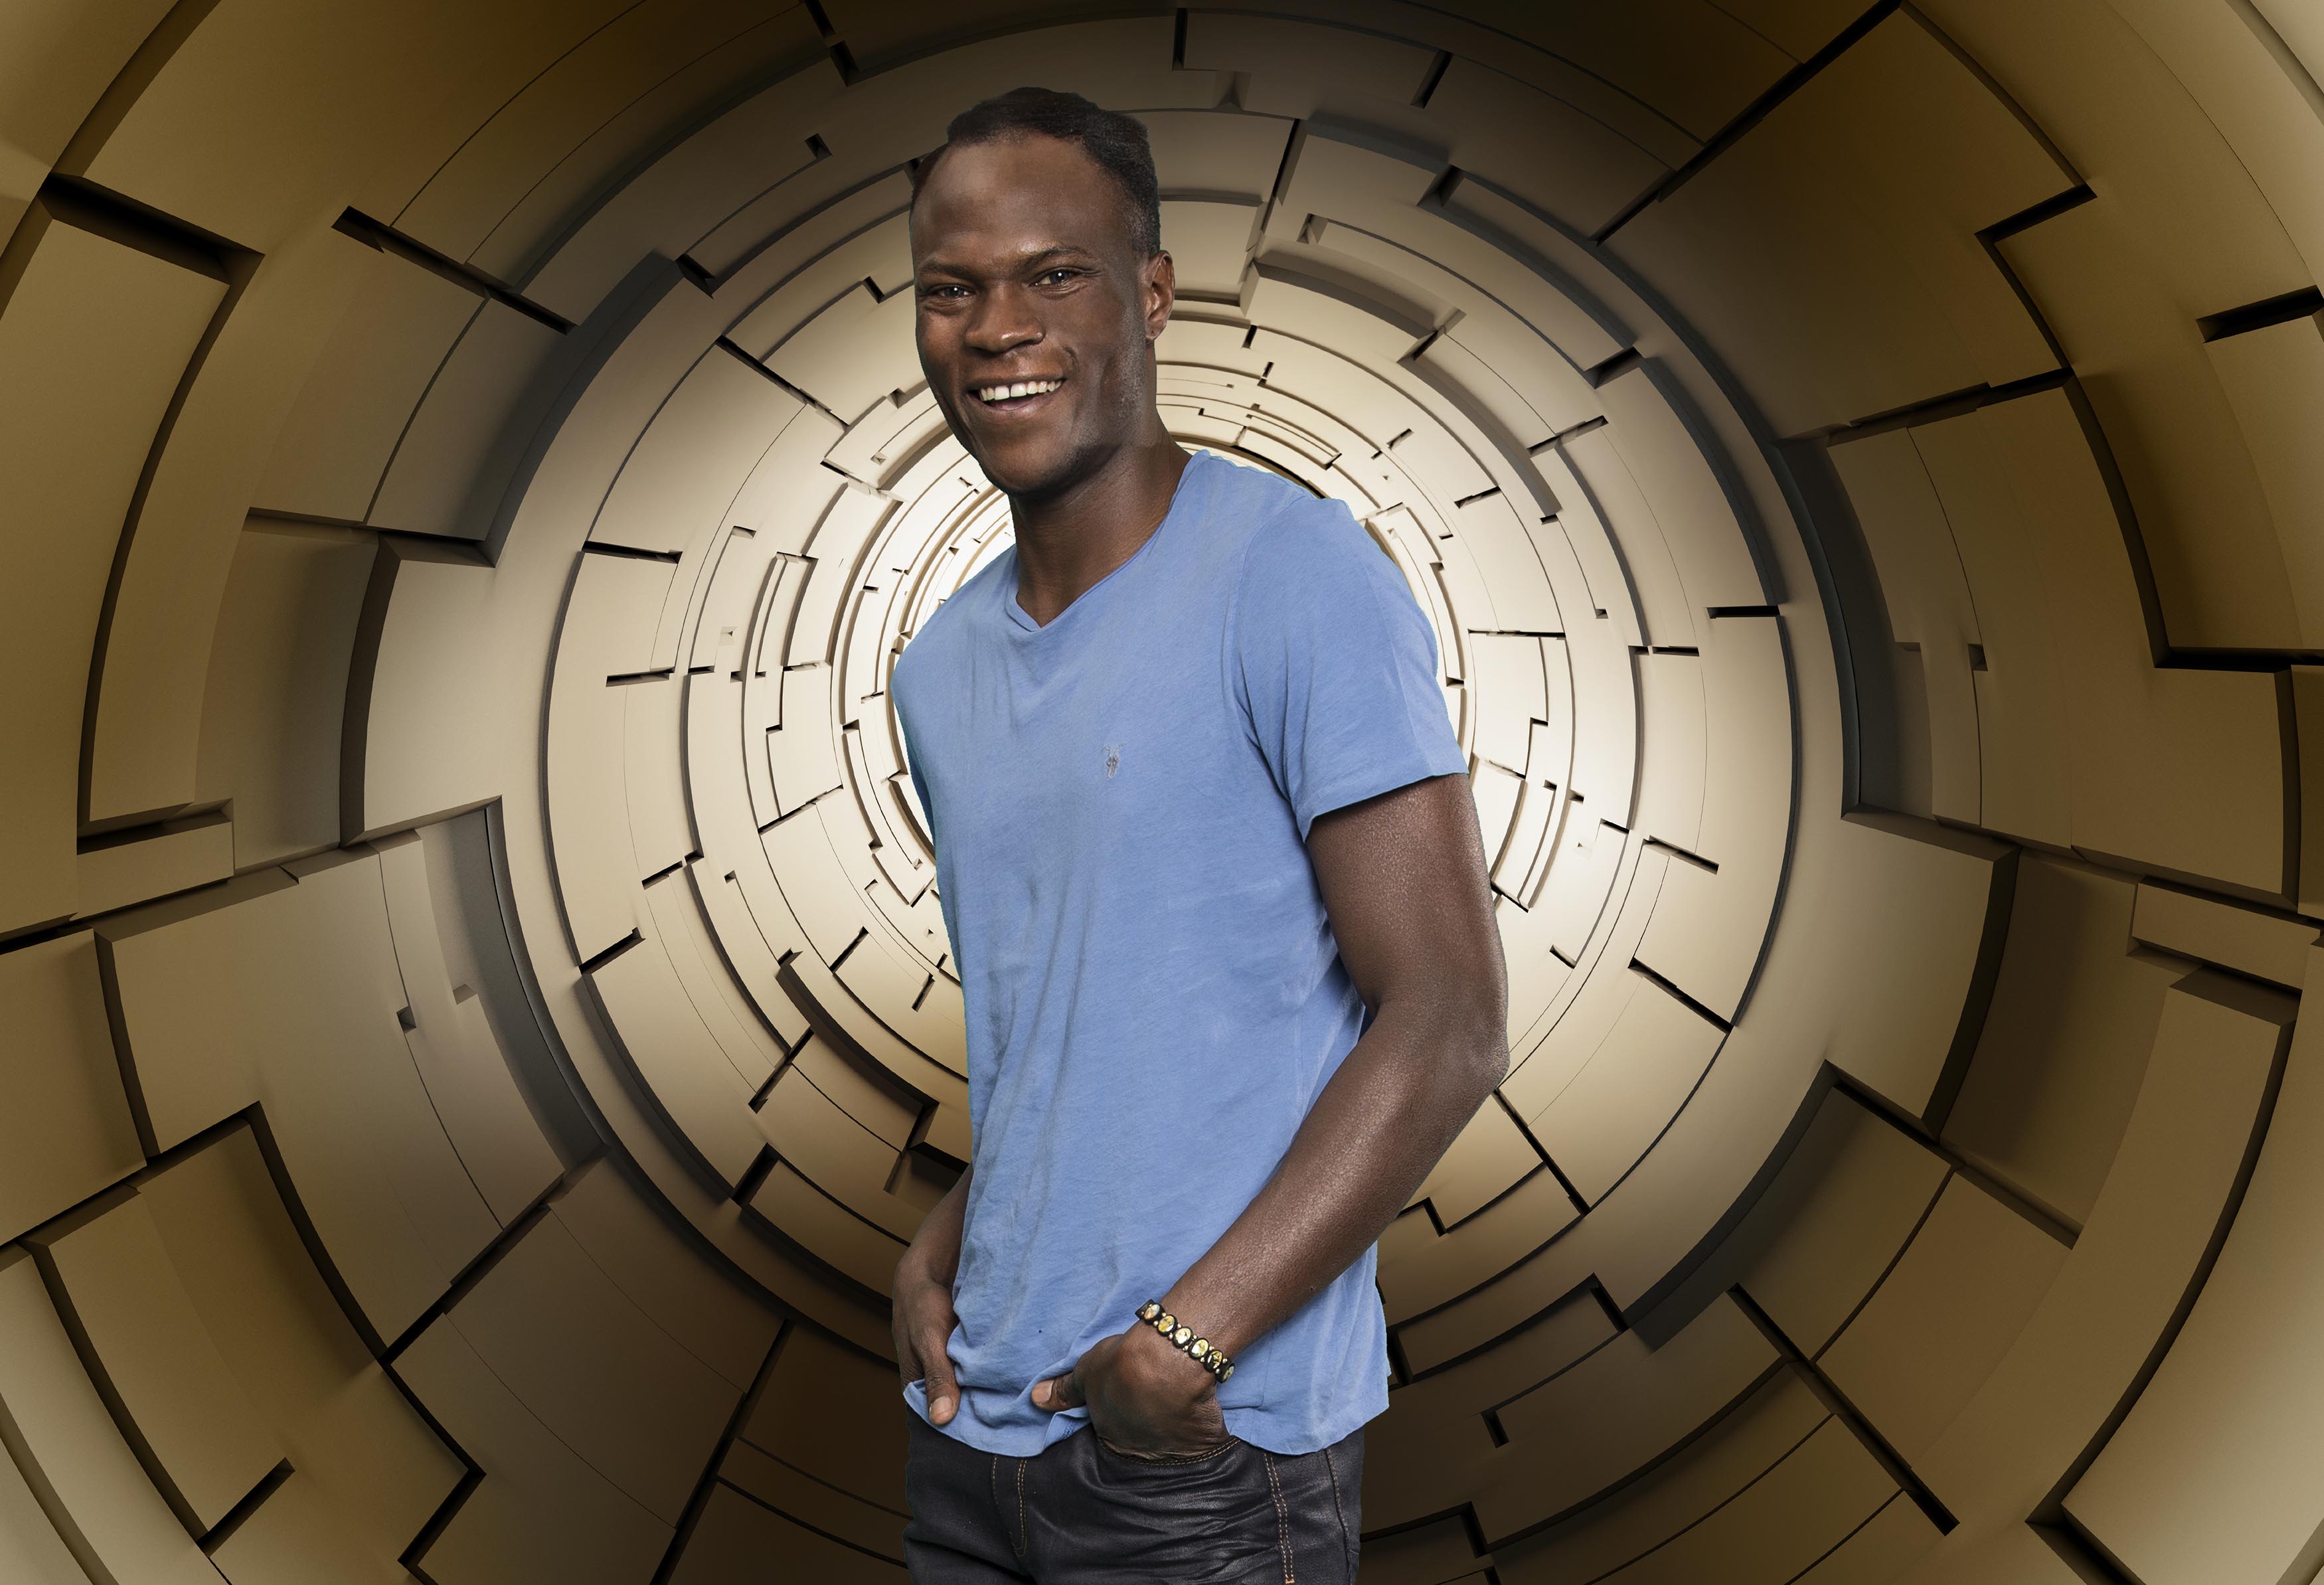 Day 52: Brian Belo hits out at Channel 5 following Helen row